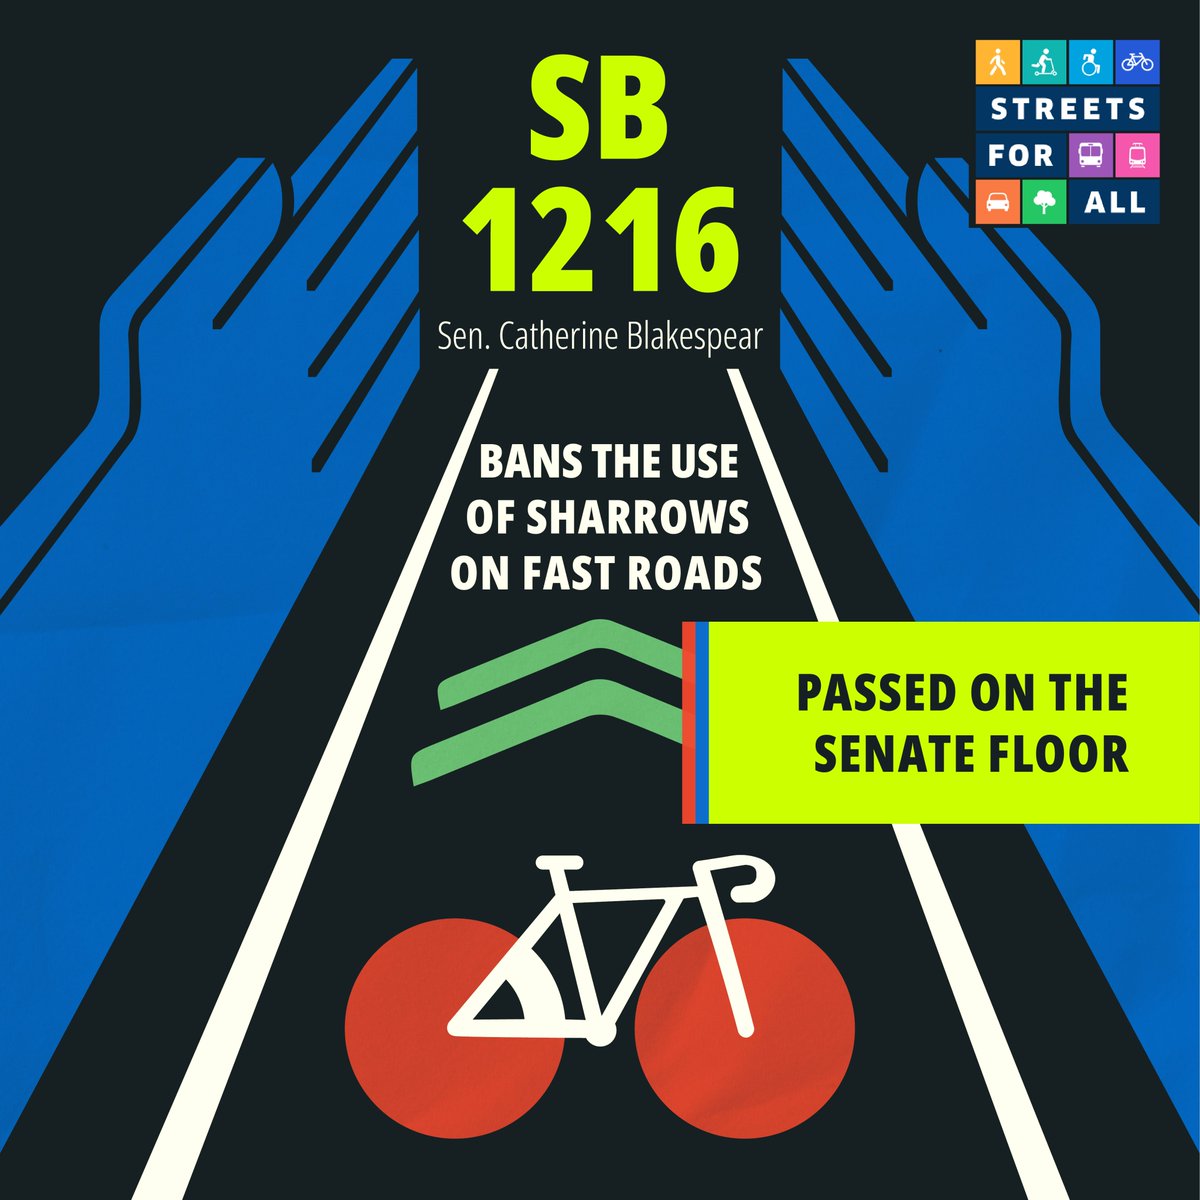 ✅ Passed the Senate Floor
SB 1216, our bill by @SenBlakespear prohibits the use of sharrows and class 3 bike lanes on streets above 30mph